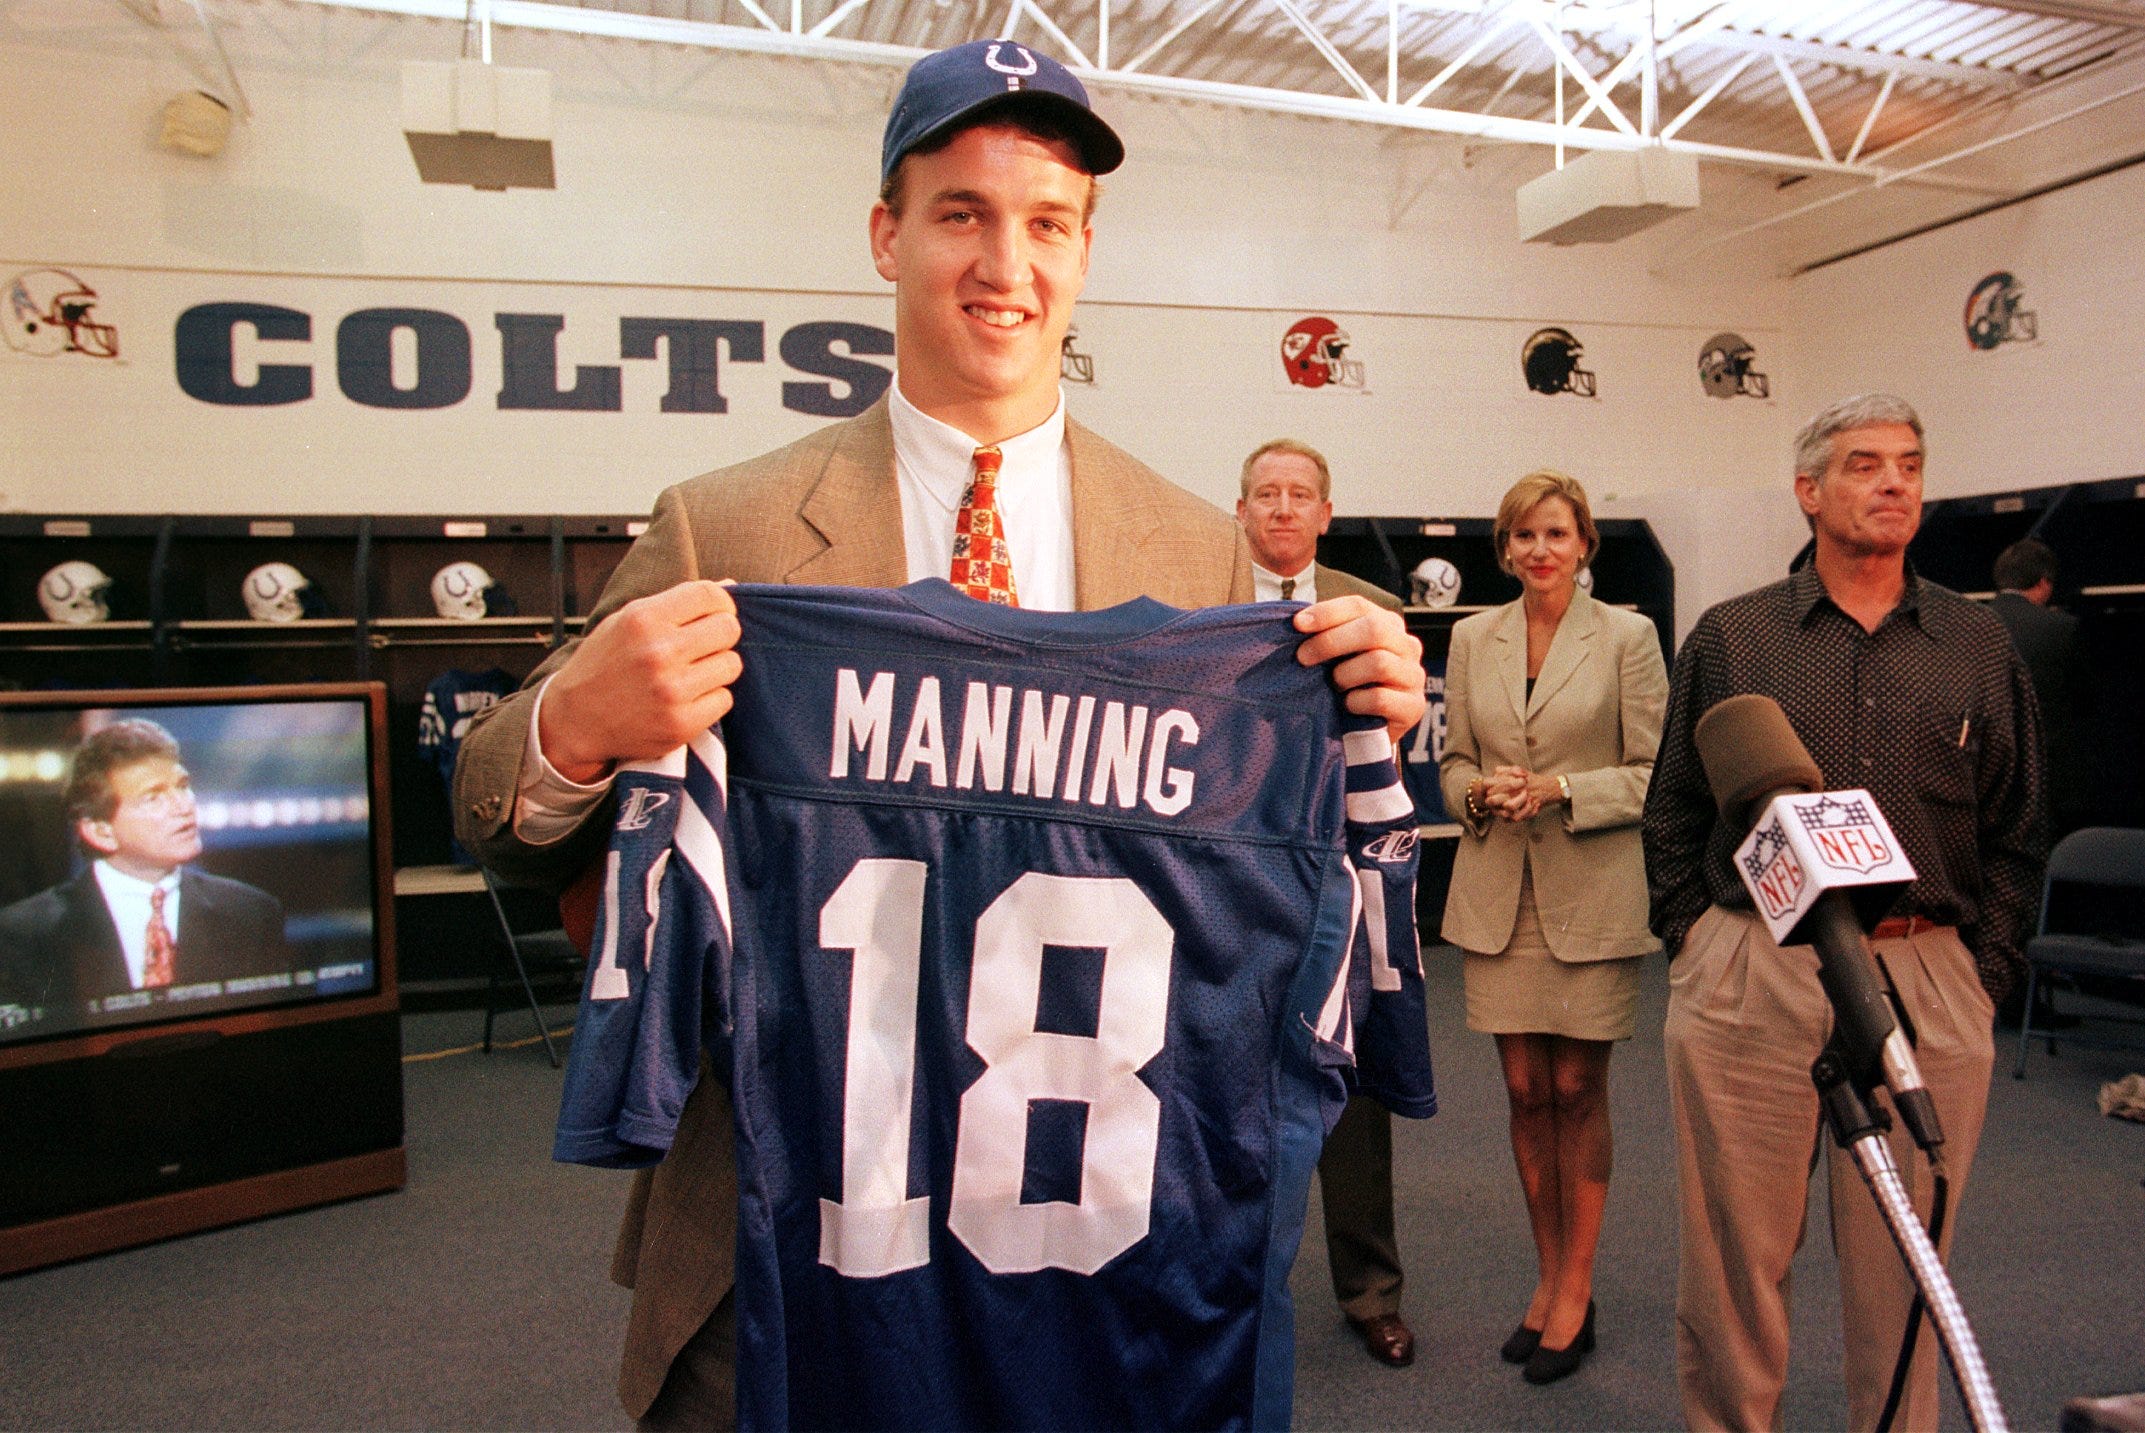 The Indianapolis Colts won the 1998 NFL draft by taking future Hall of Fame quarterback Peyton Manning with the first overall pick.